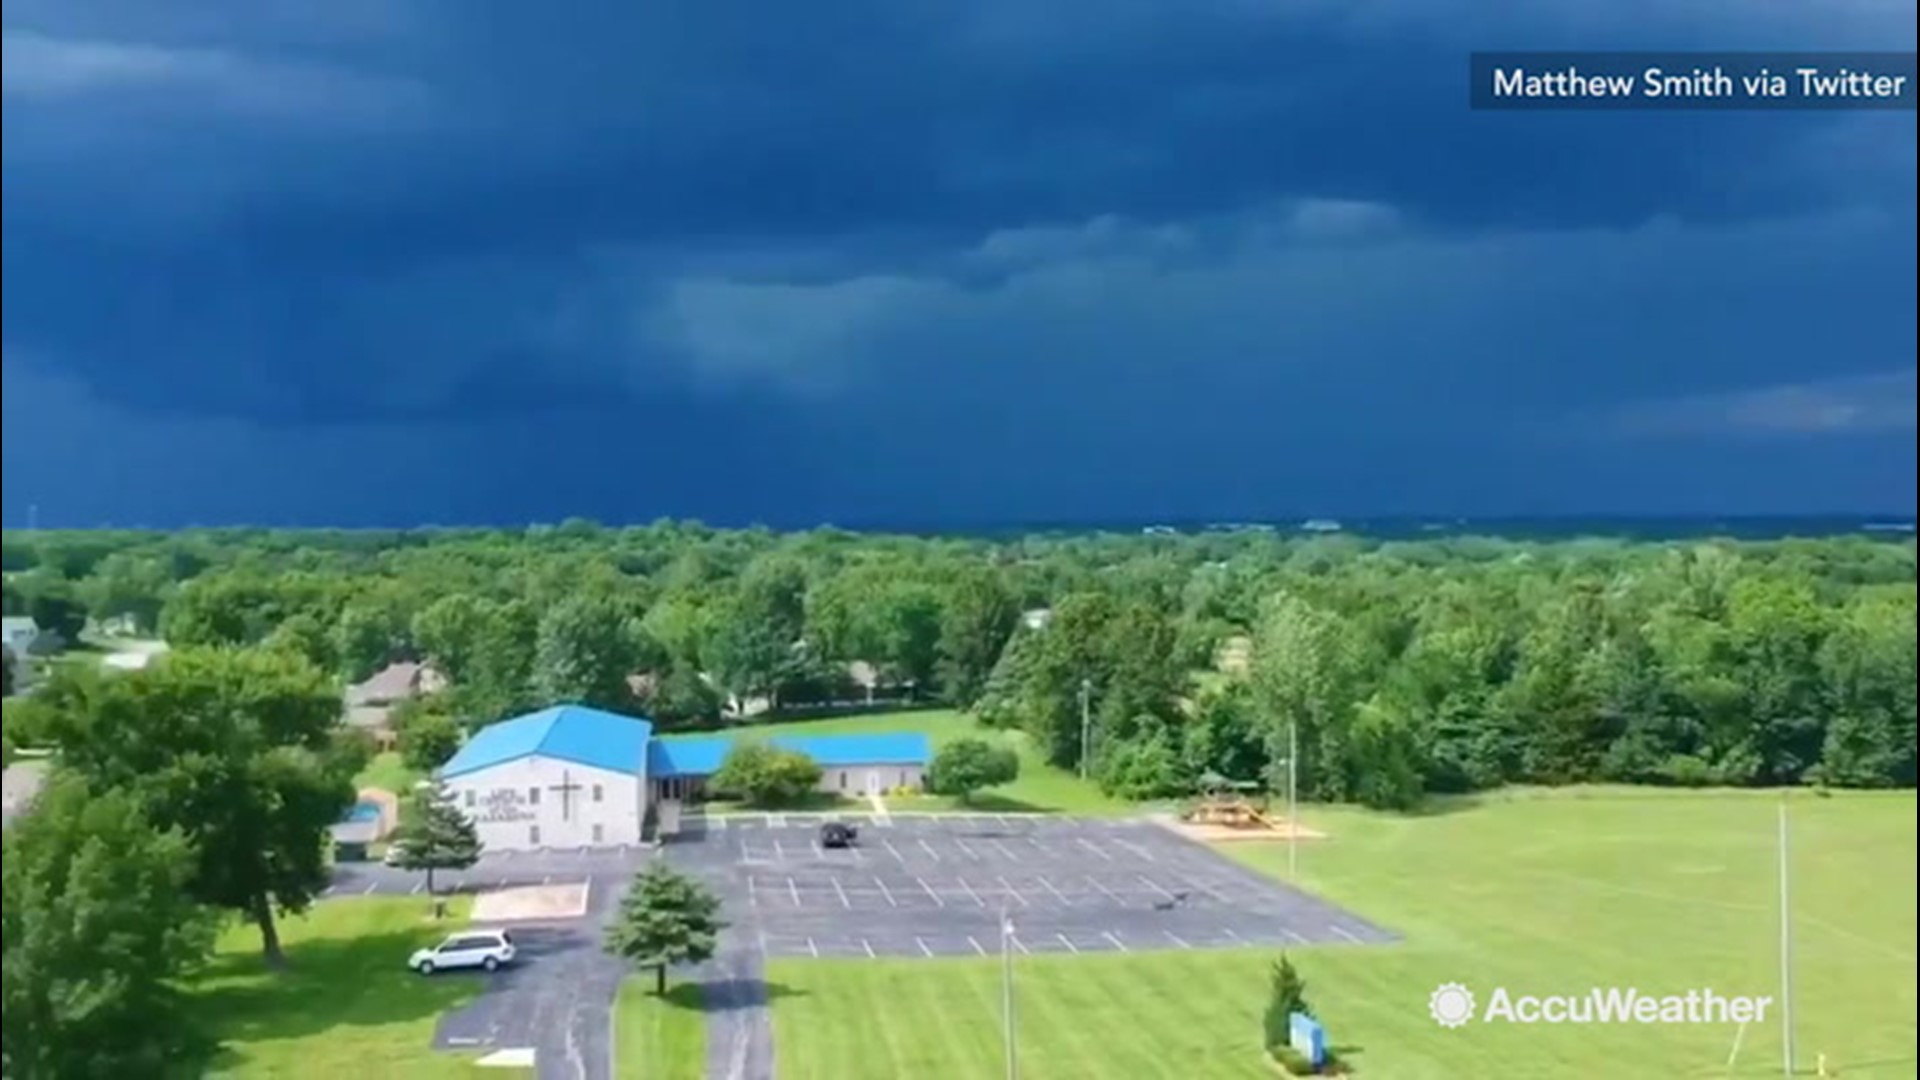 The town of Warrensburg, Missouri, was warned that a thunderstorm would be travelling over their town on June, 12. As the storm clouds gathered over the town, this drone footage shows just how far out those clouds reached.